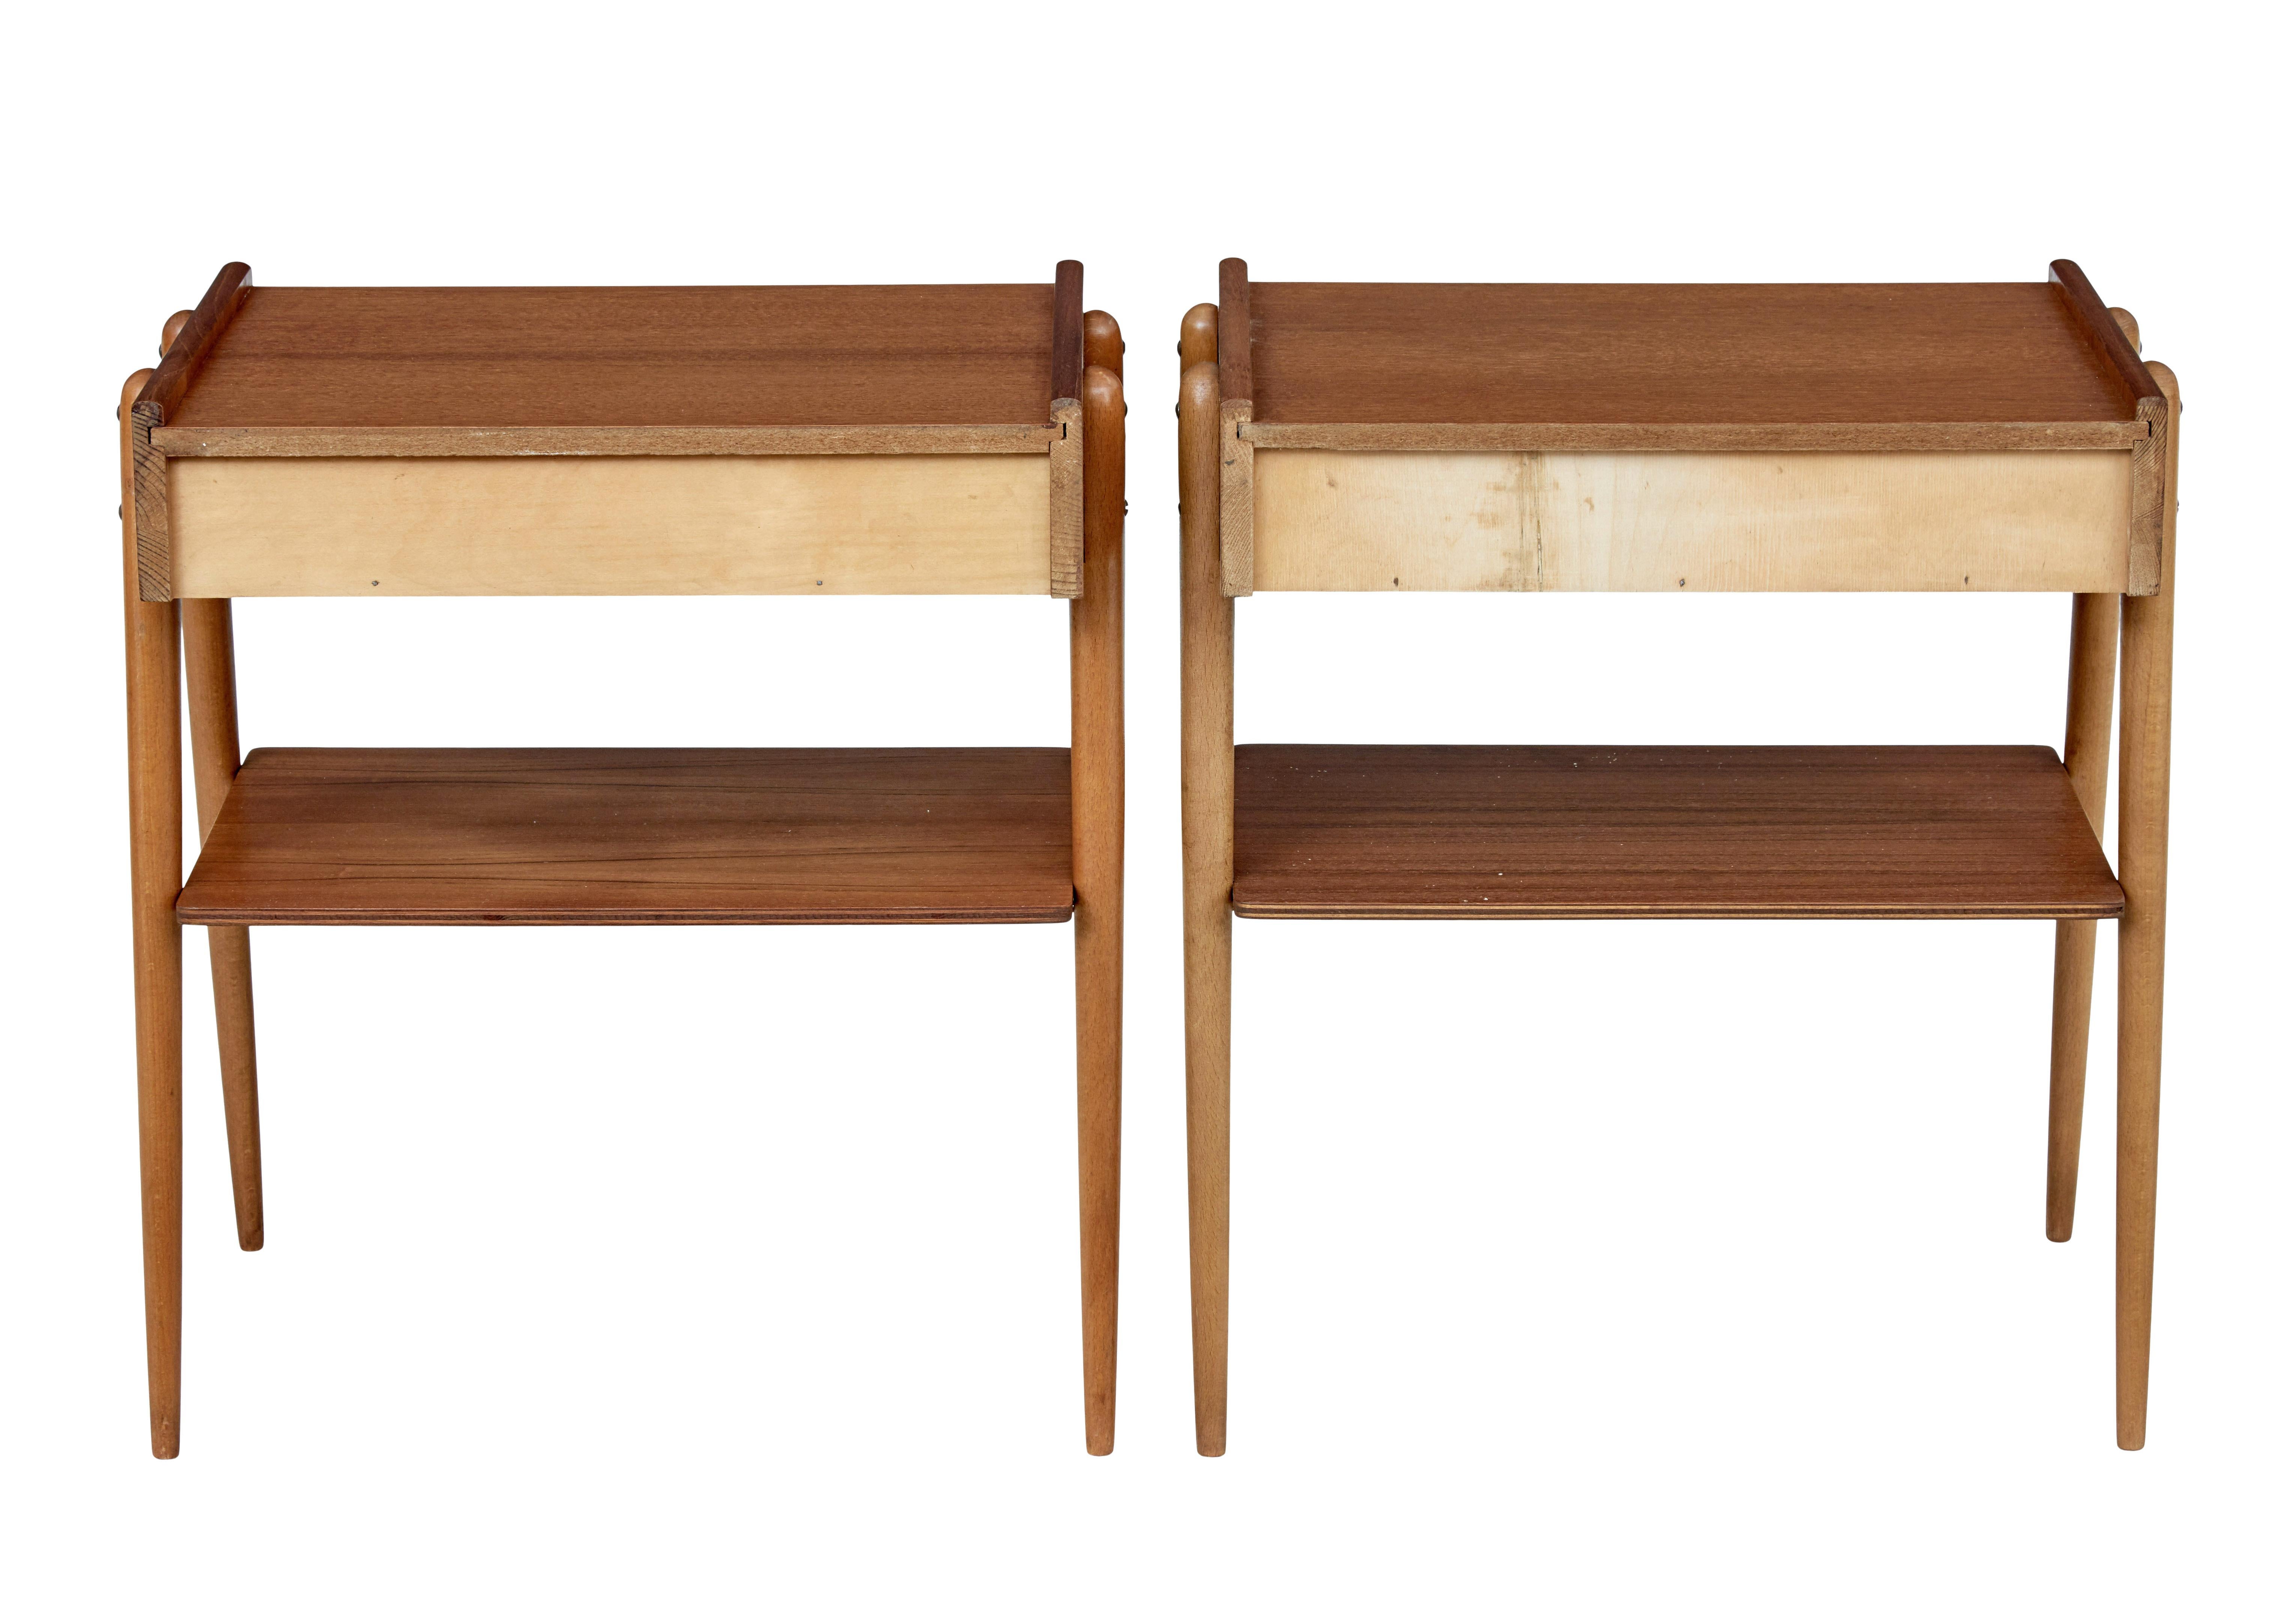 Swedish Pair of Mid-20th Century Teak Bedside Tables by Carlstrom & Co.